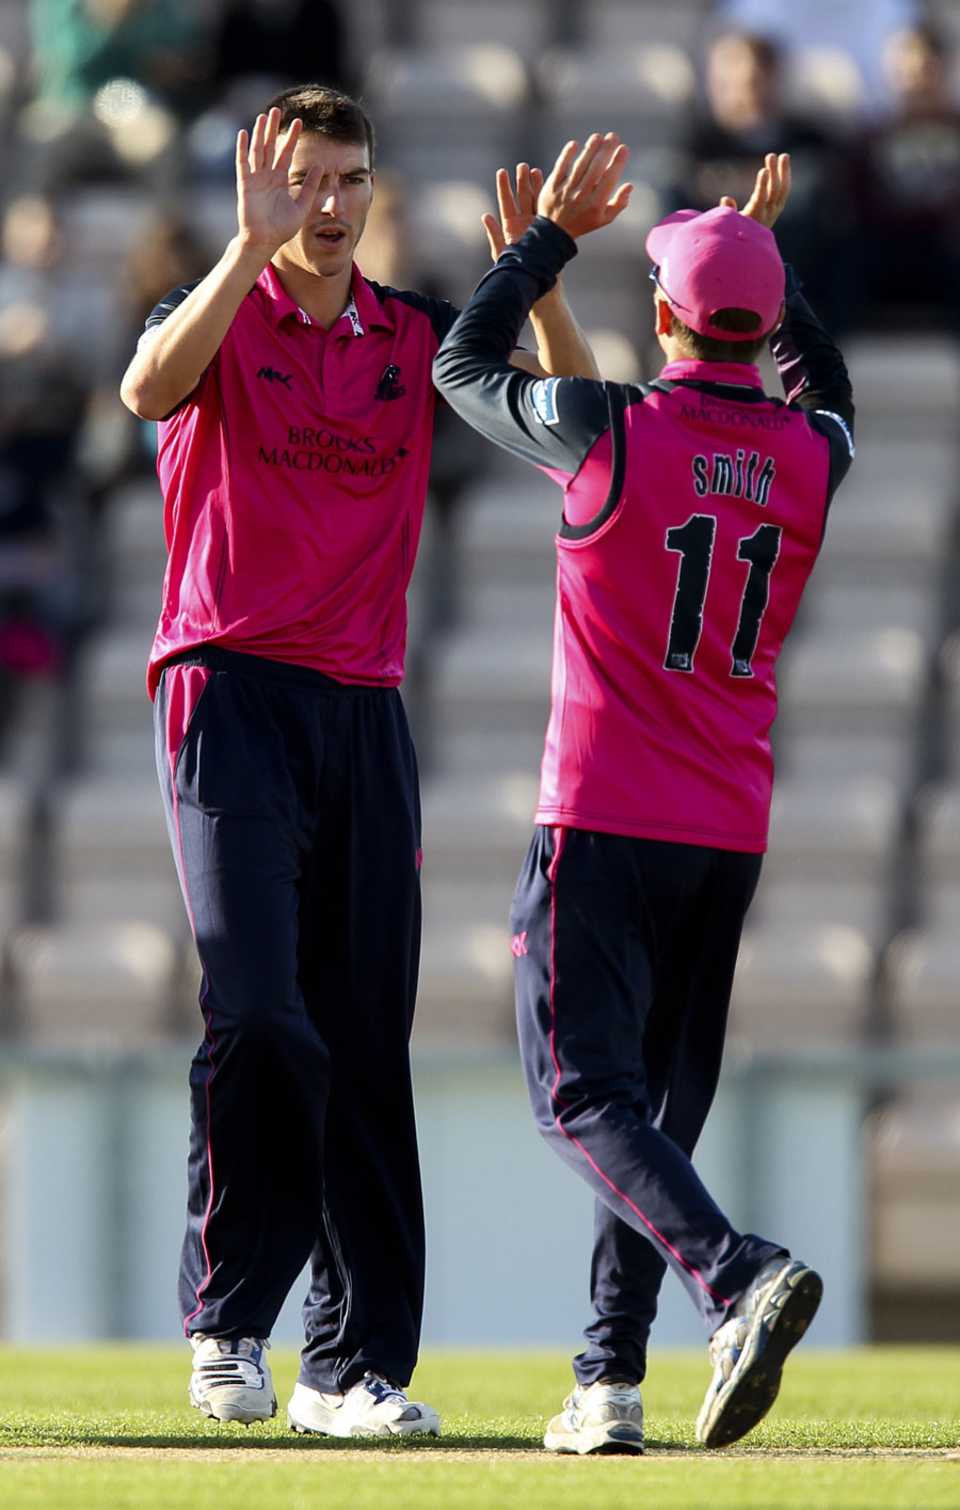 Toby Roland-Jones took four wickets in Middlesex's win